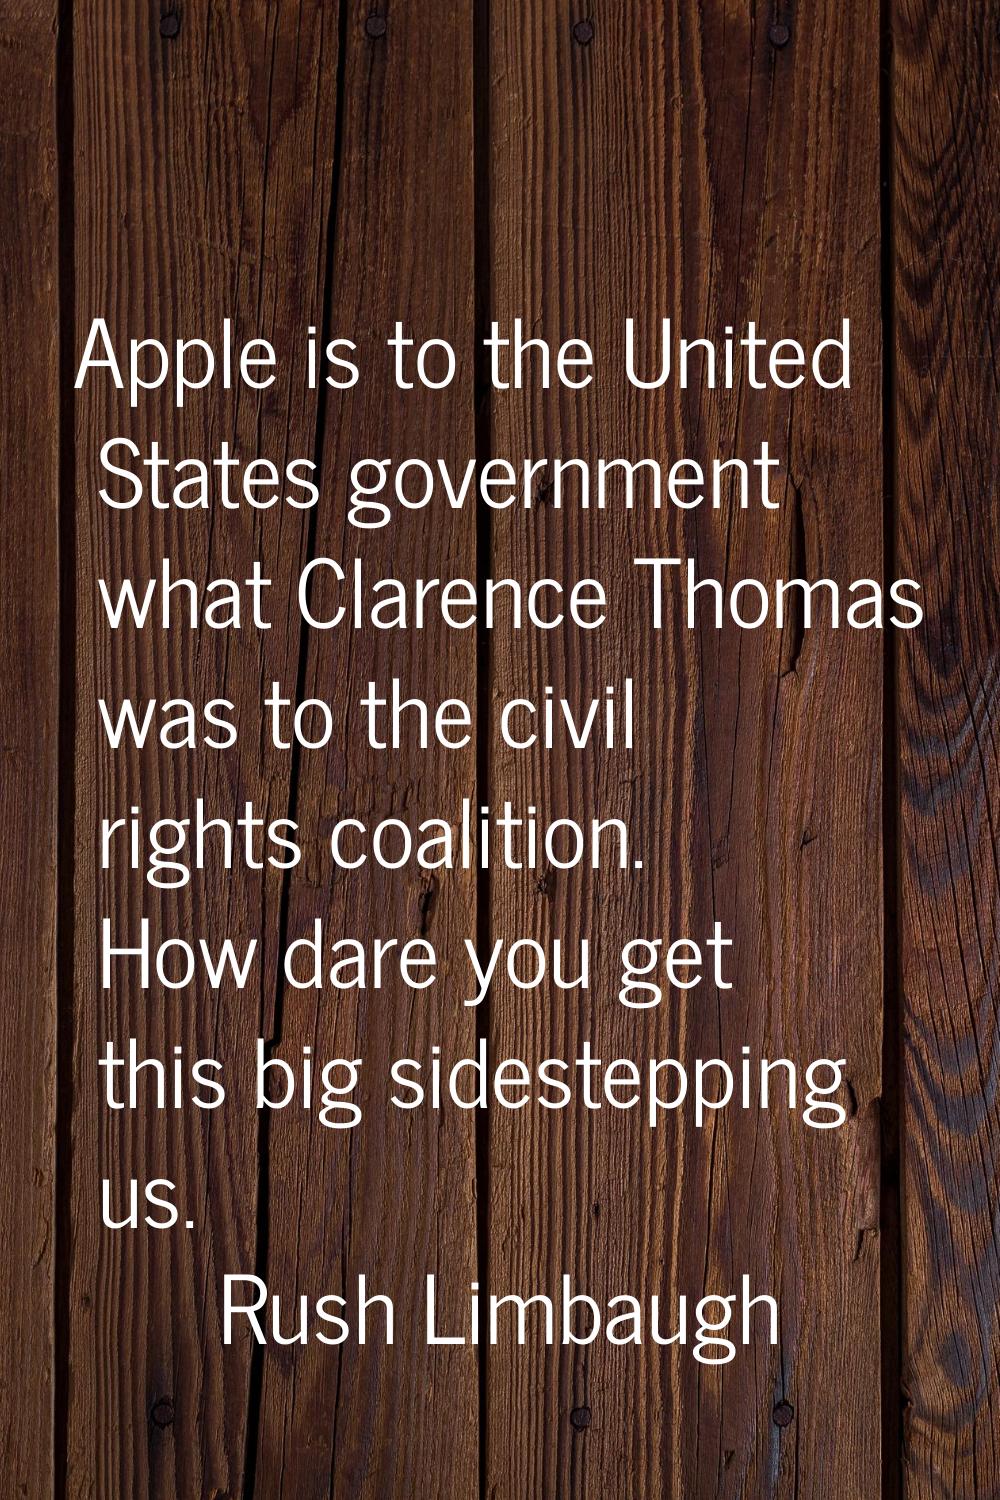 Apple is to the United States government what Clarence Thomas was to the civil rights coalition. Ho